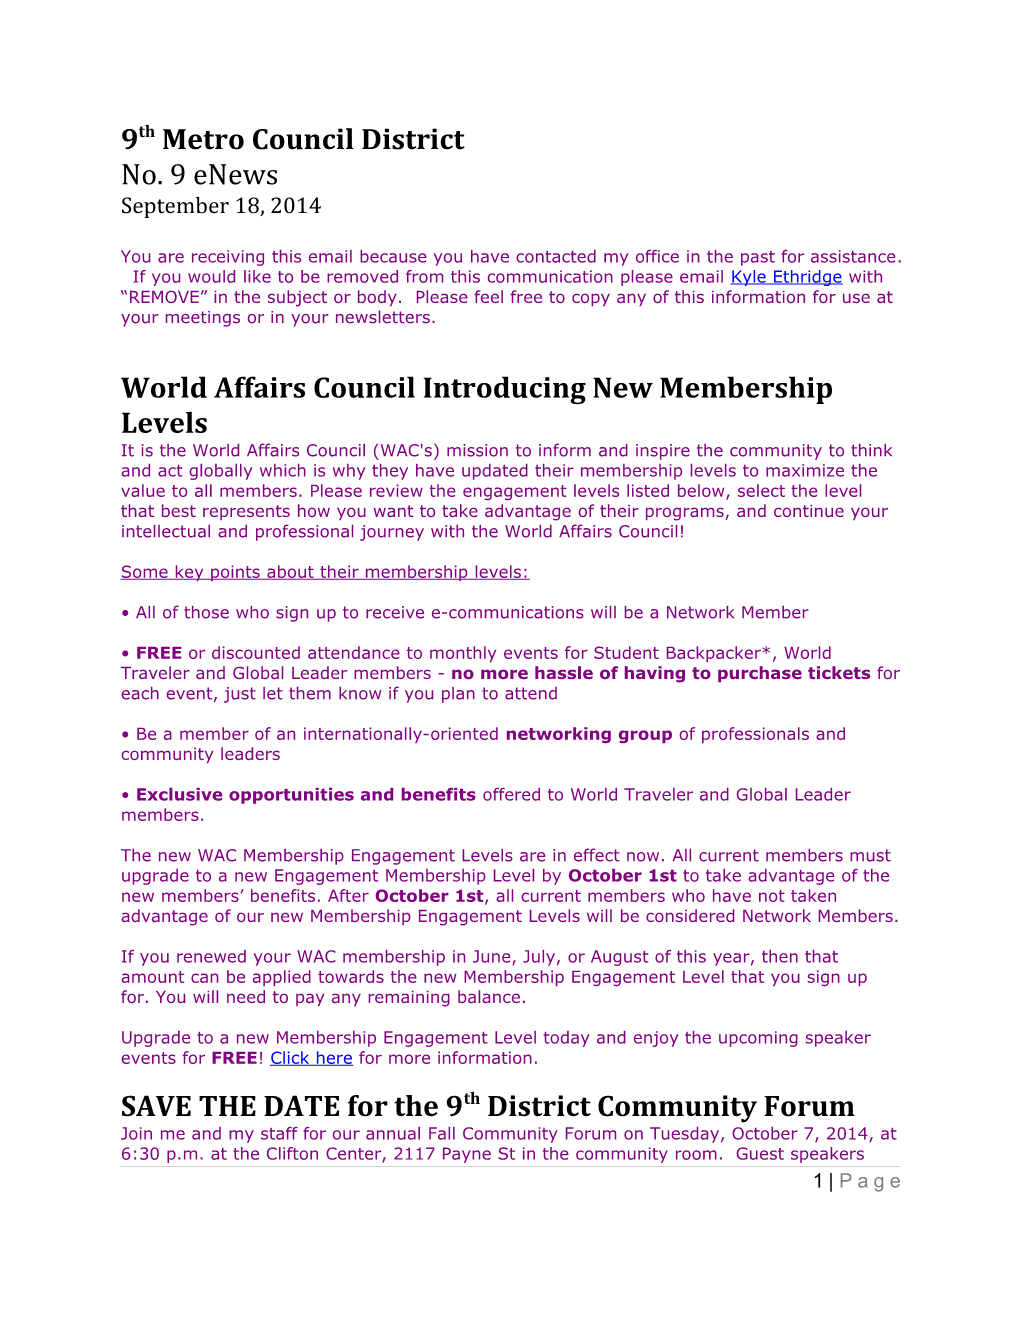 World Affairs Council Introducing New Membership Levels